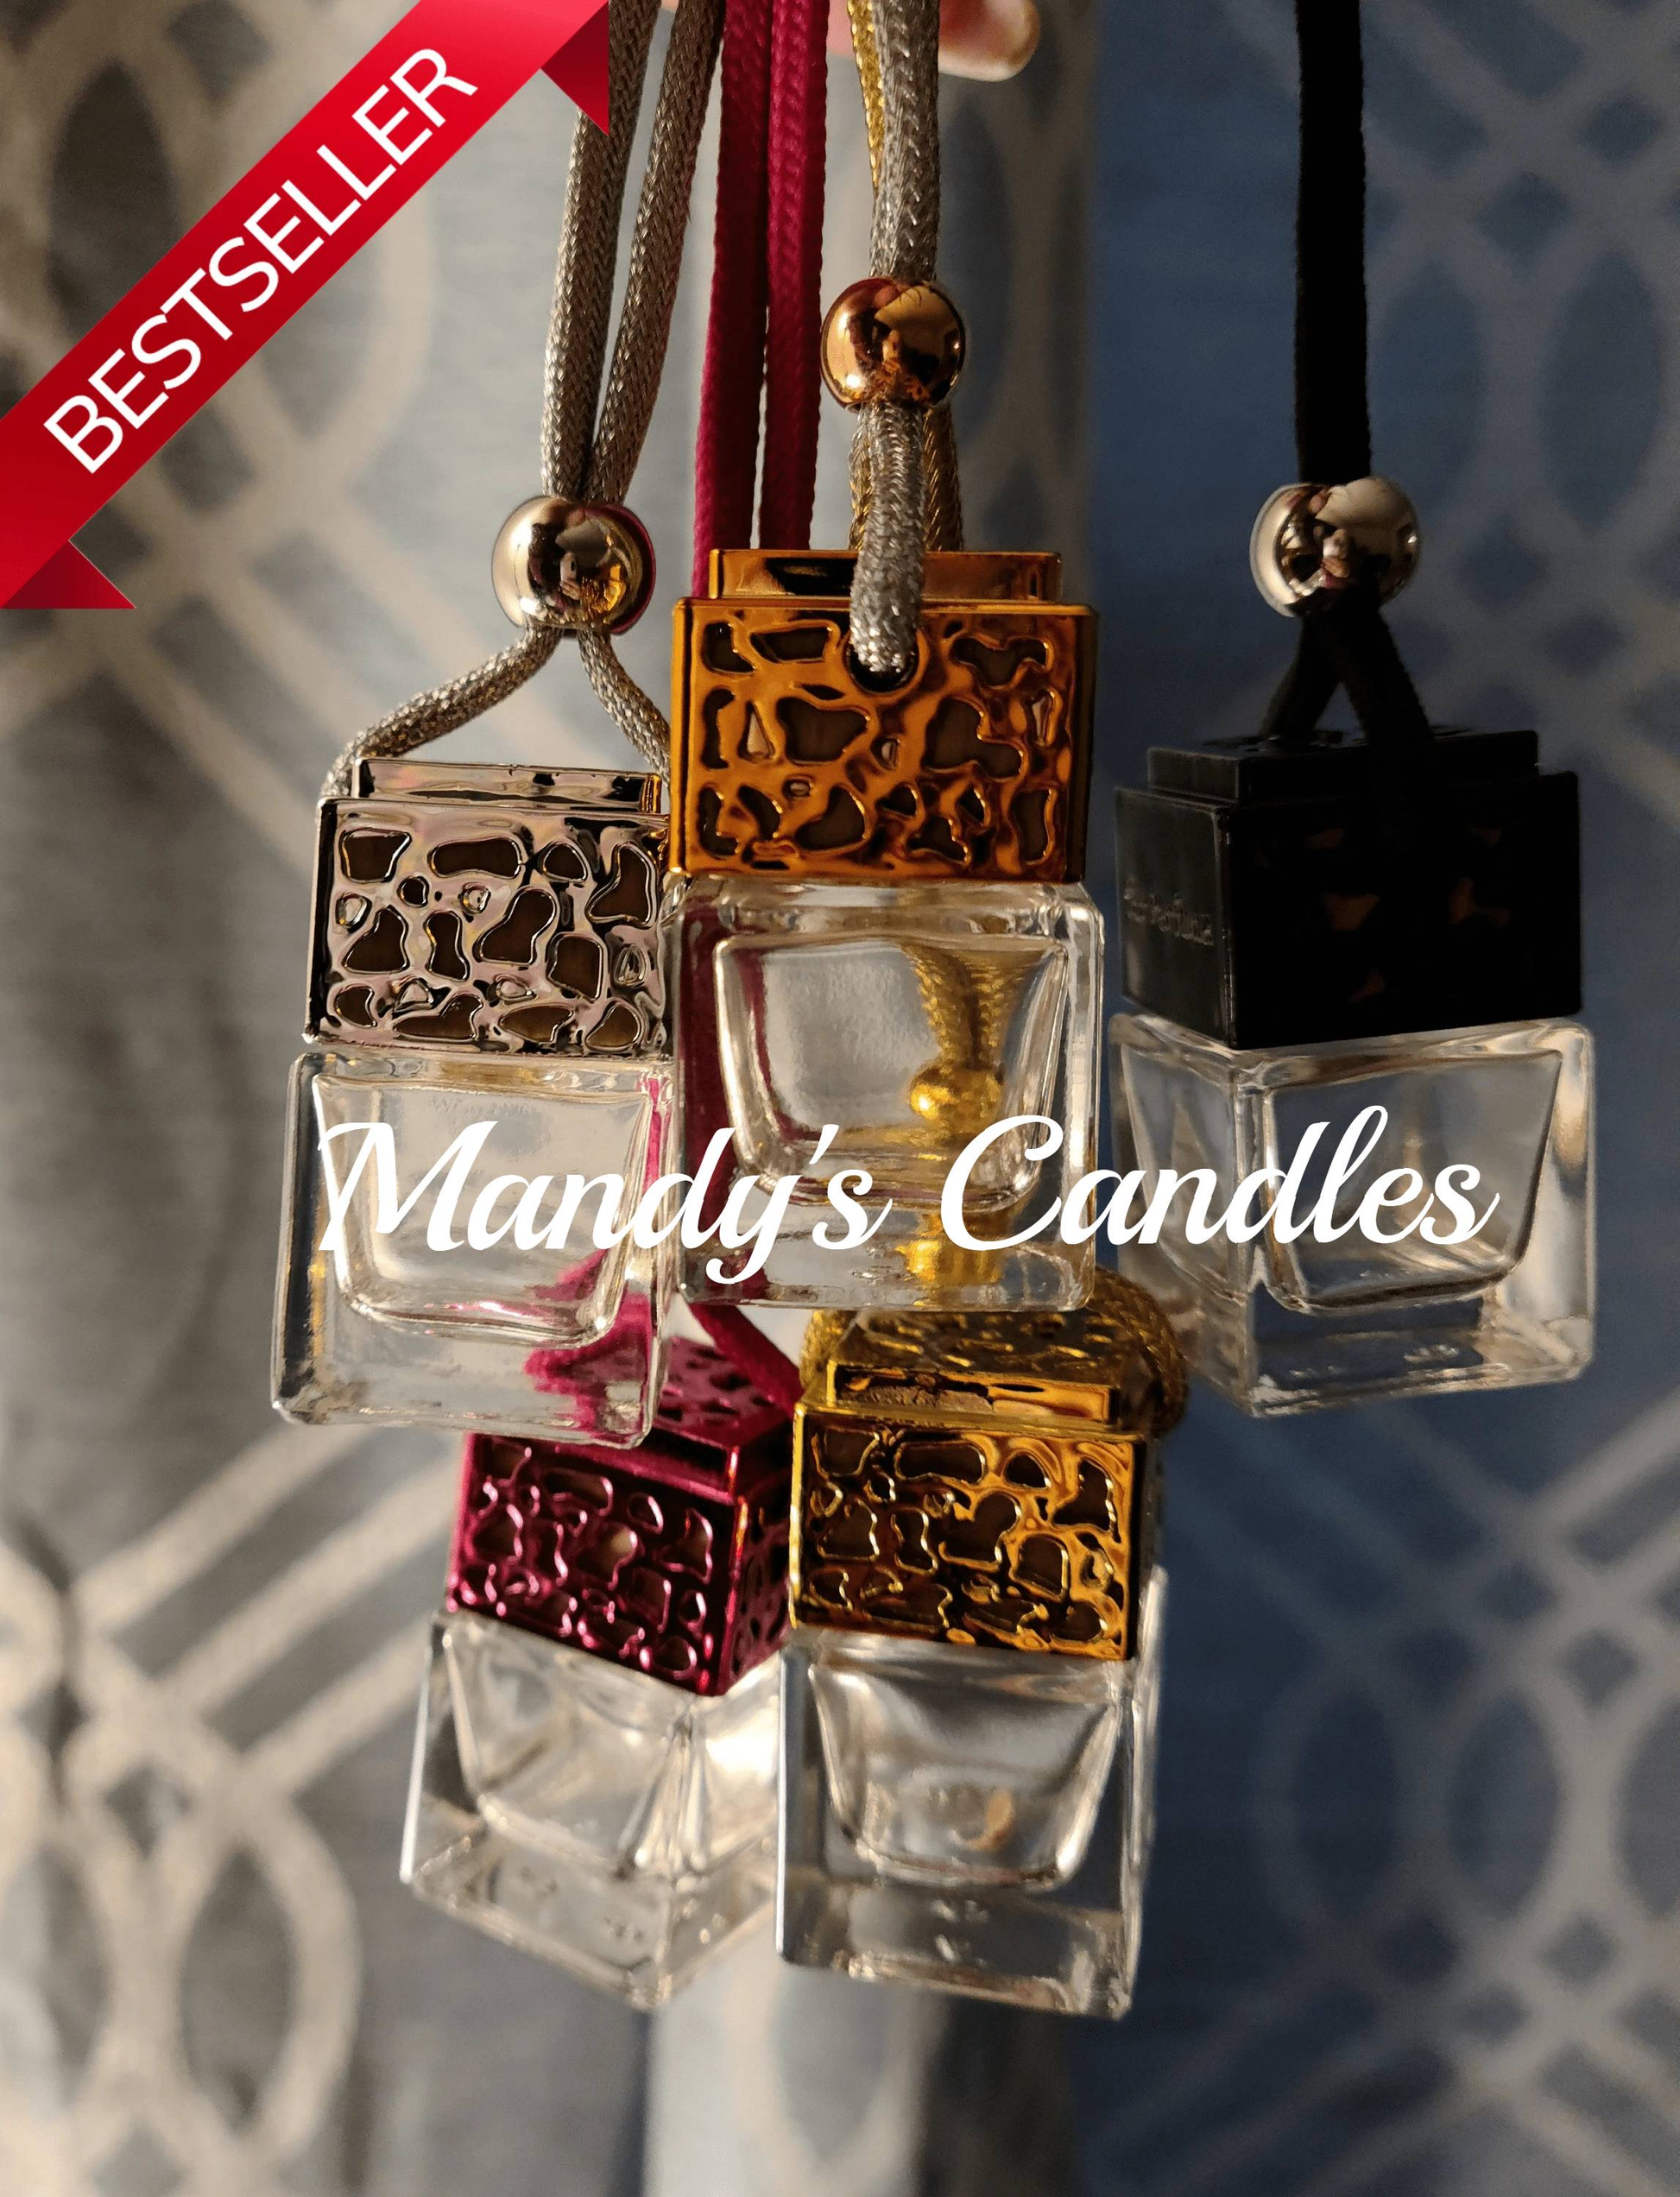 Elegant Metallic Silver Car Air Fresheners. - Mandy's Handcrafted Candles